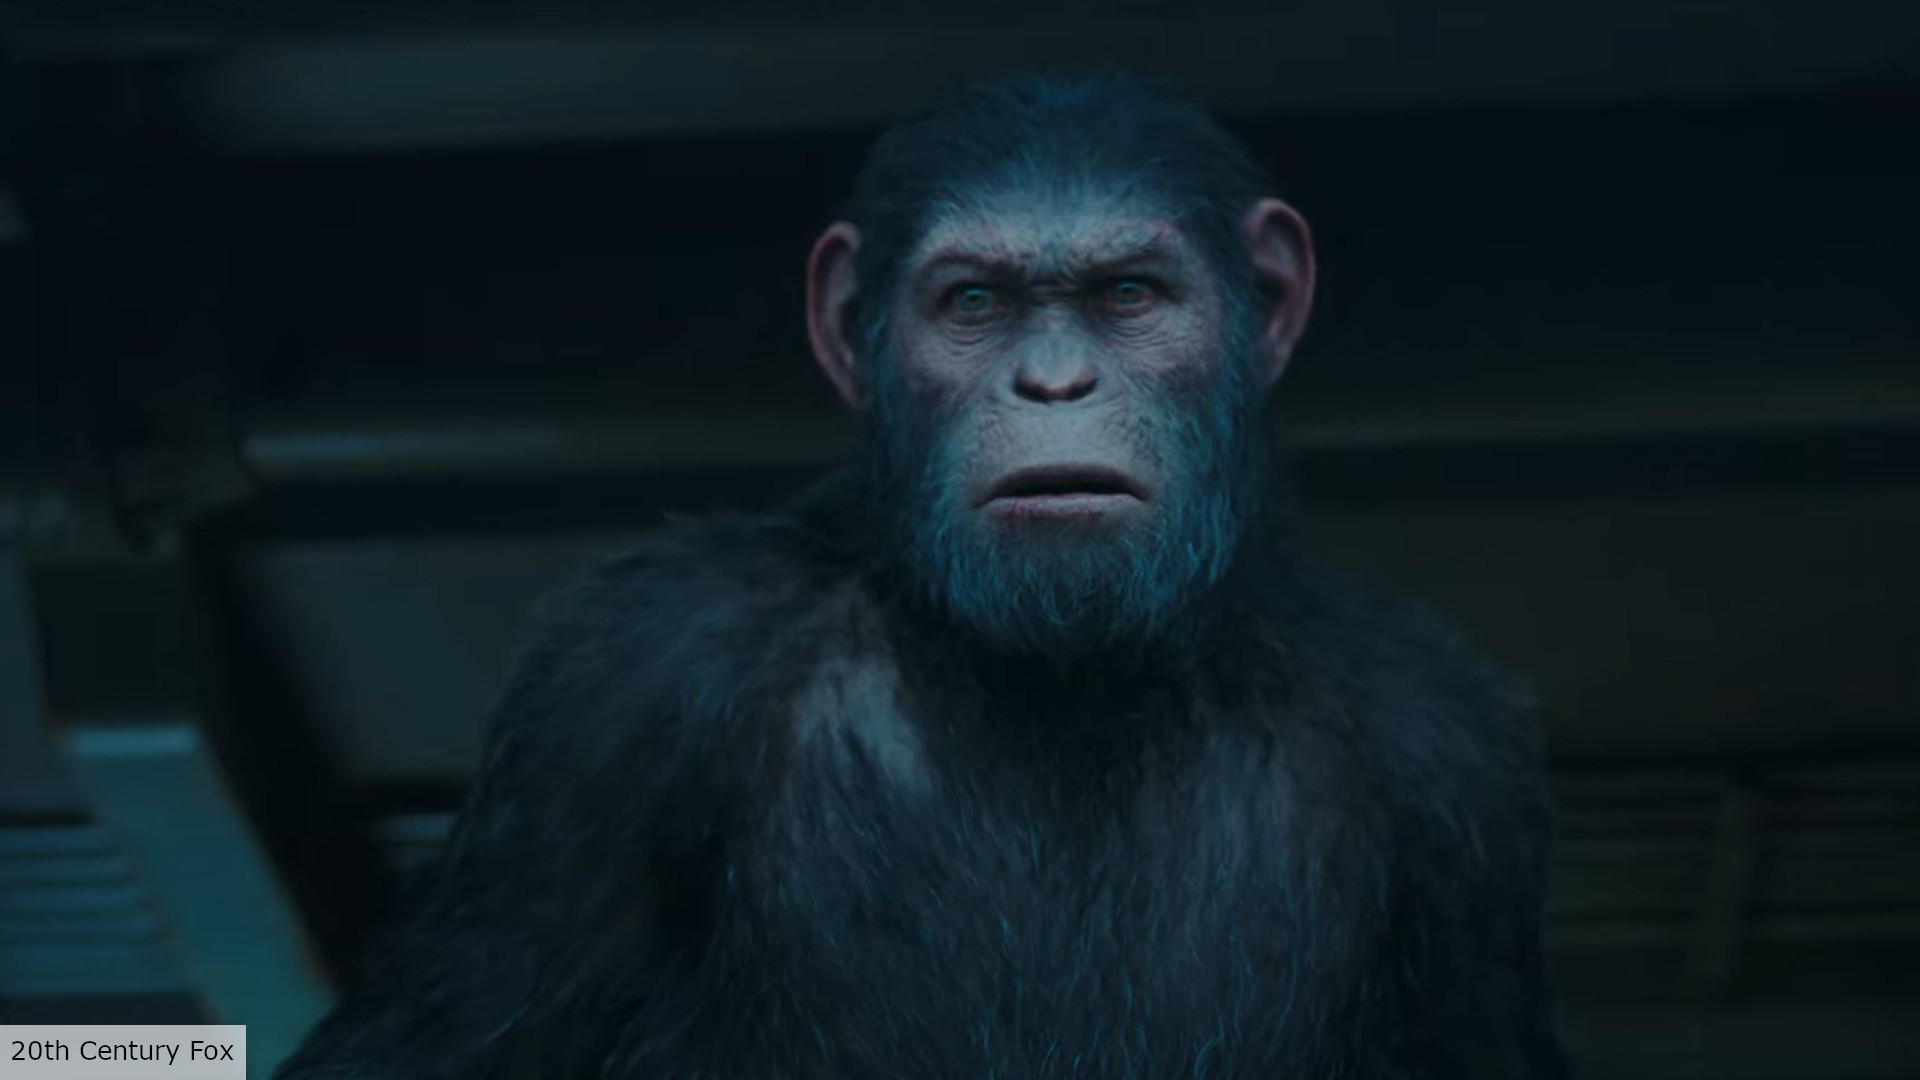 Kingdom of the of the Apes release date, cast, plot, and more